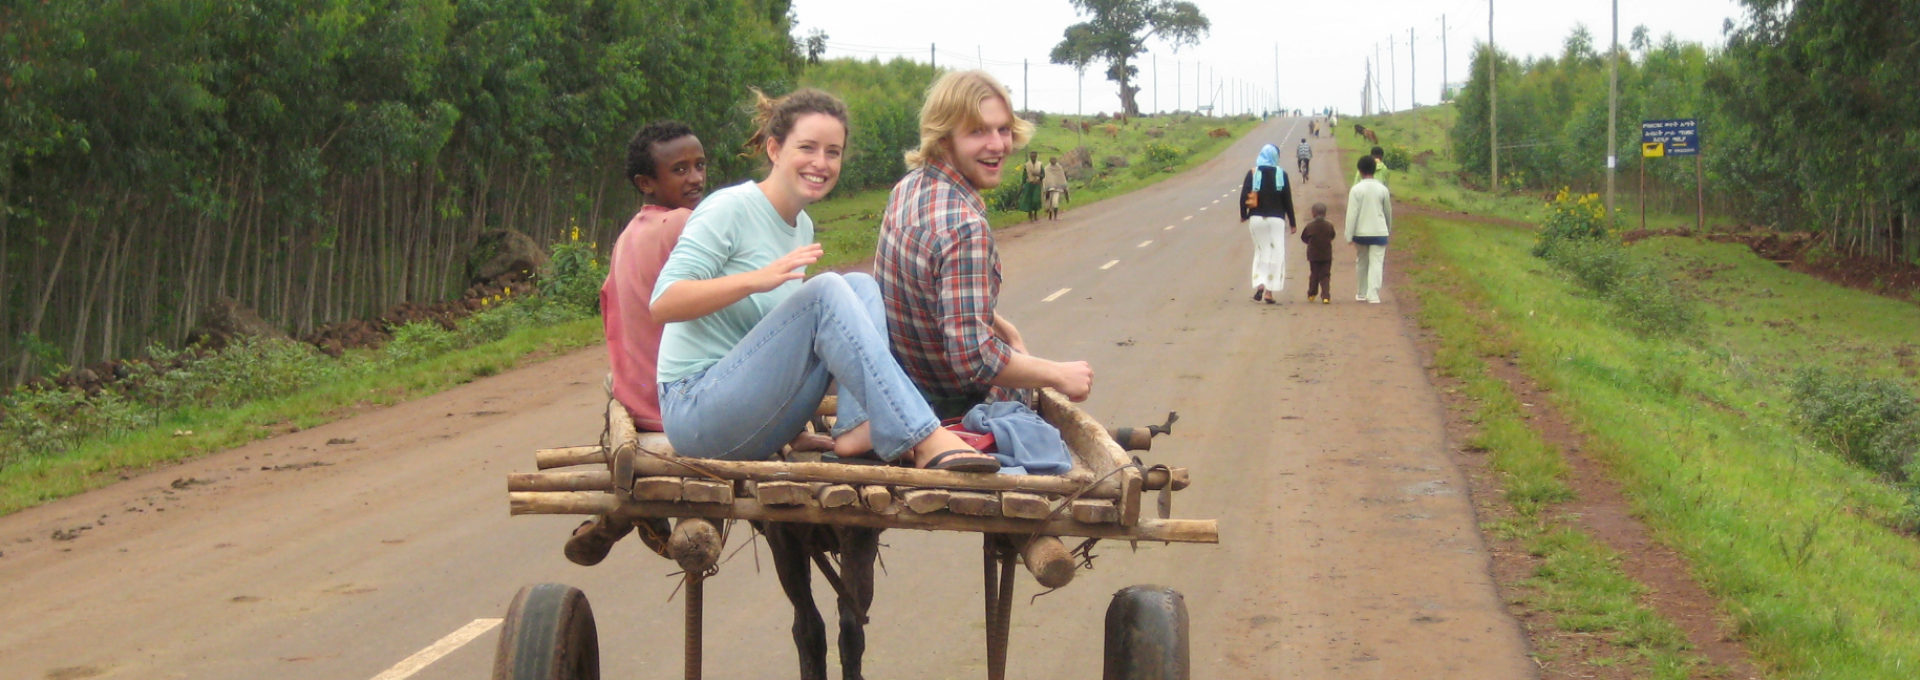 Two volunteers sitting on a animal pulled cart.